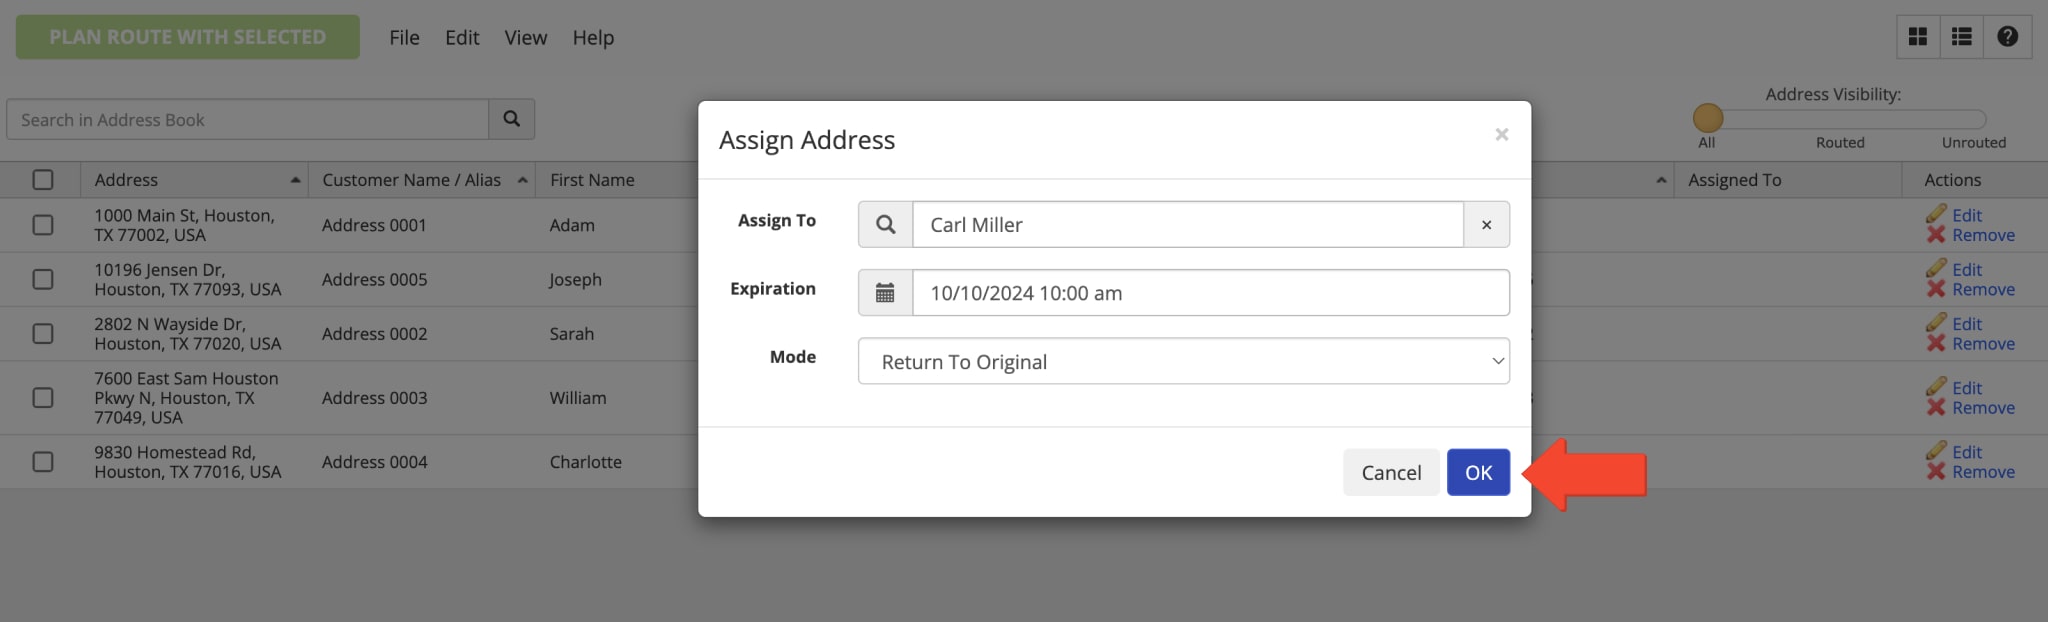 Assign addresses to team members and users, select address permissions expiration date, and owner details. 